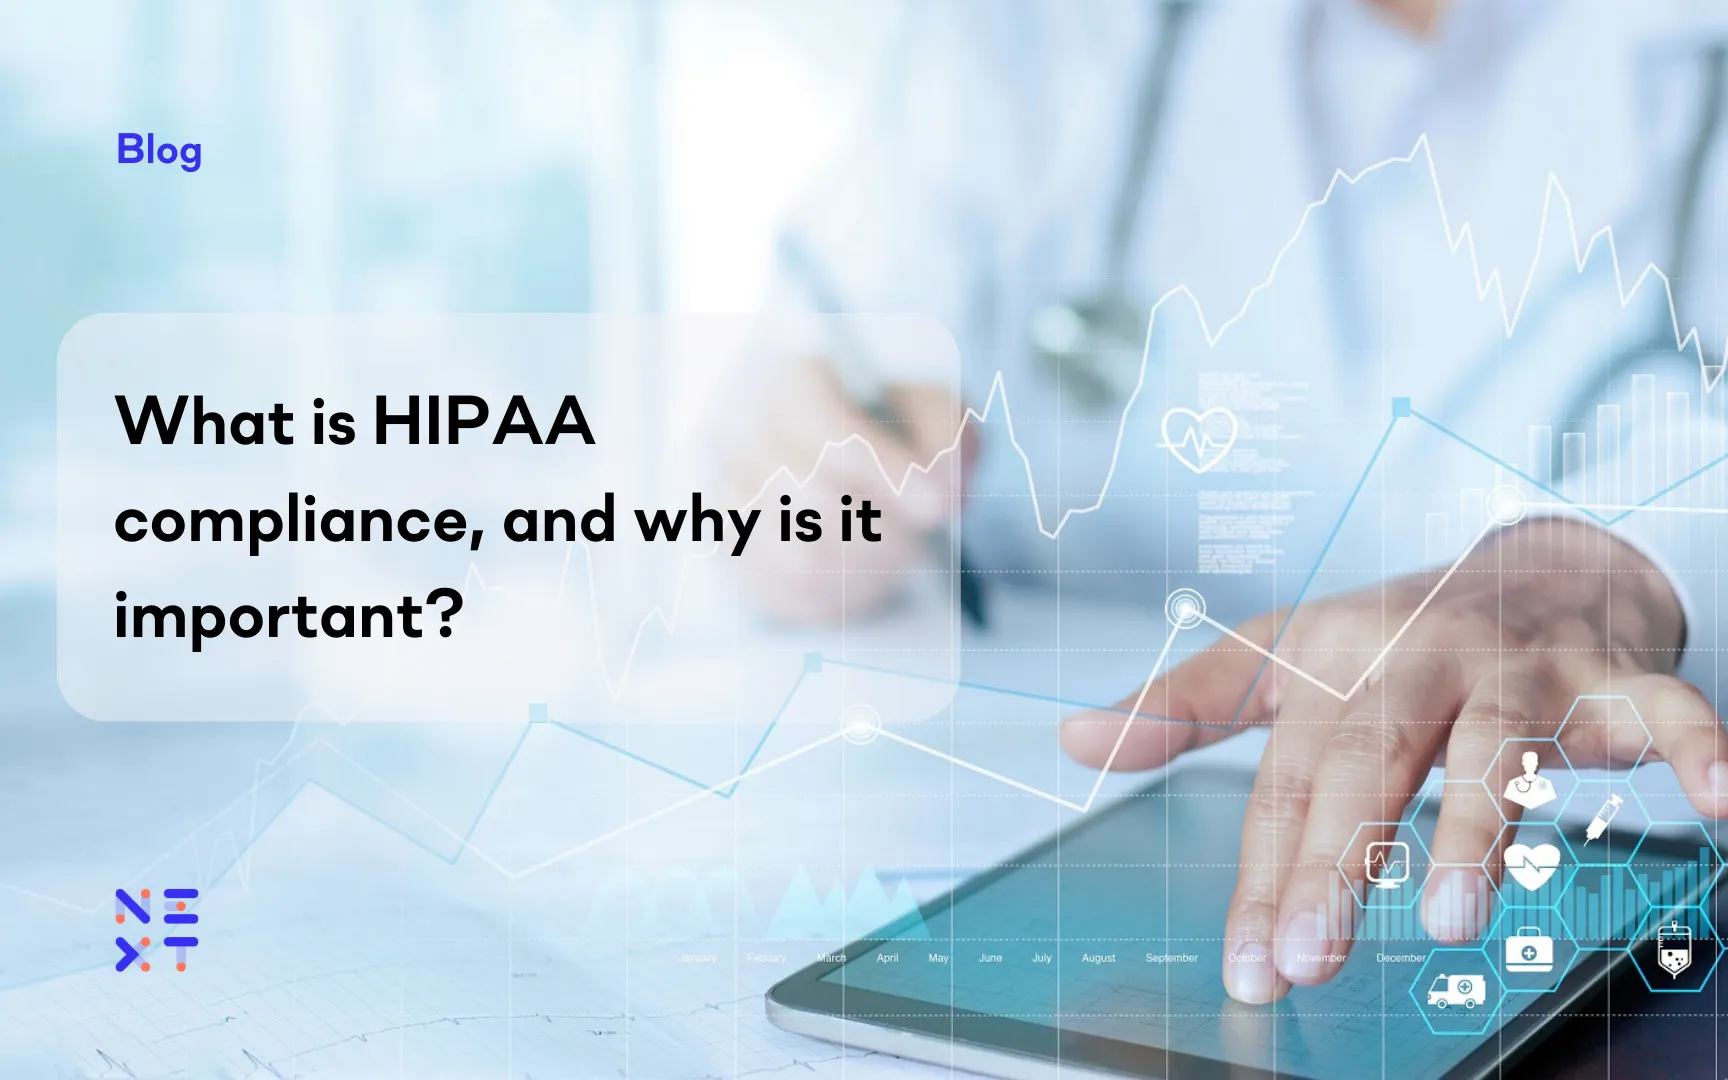 What is HIPAA compliance, and why is it important?